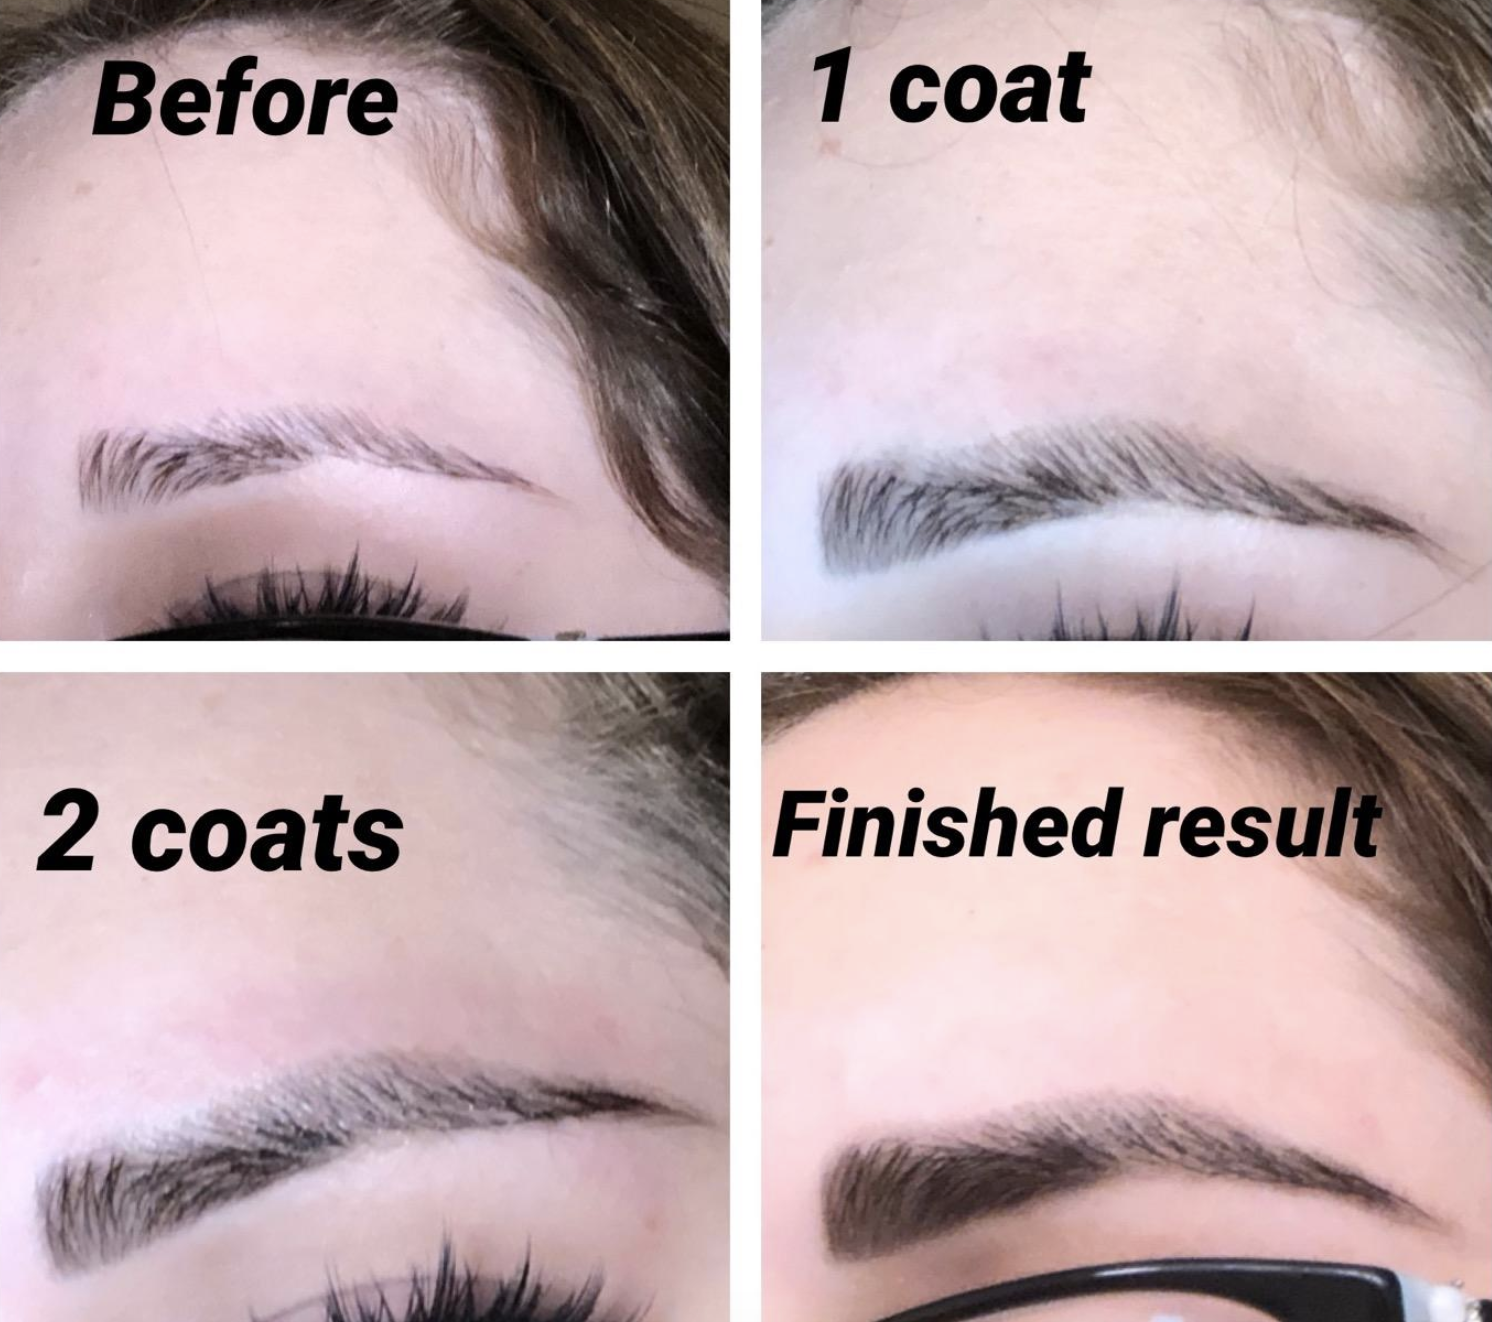 four progression photos of a reviewer applying the dye. after photo shows fuller looking brows.